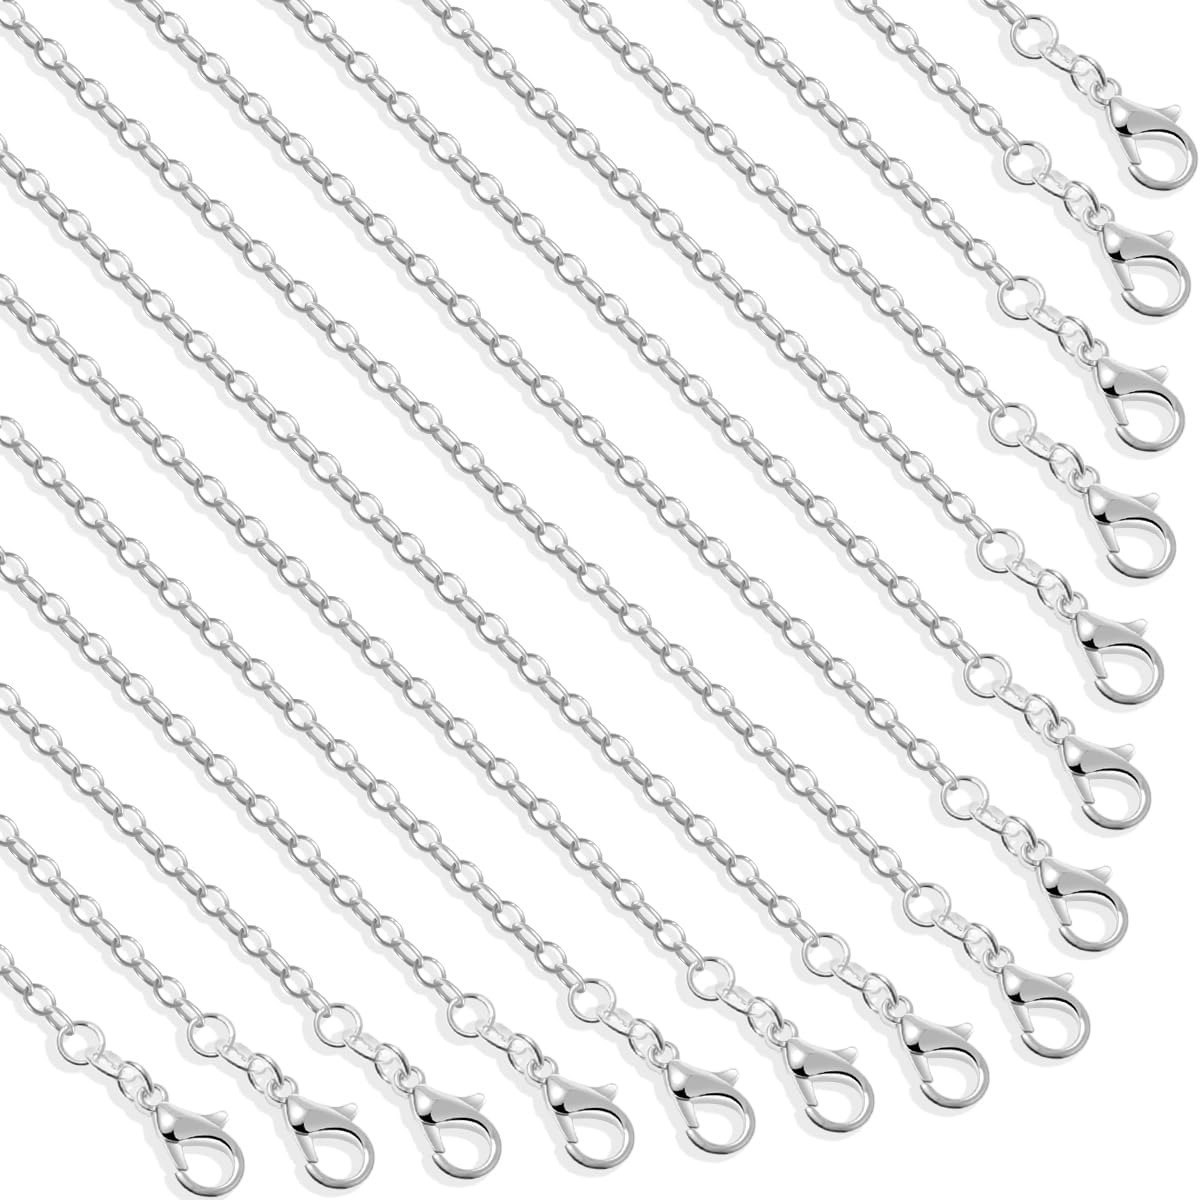 PackS Silver Plated Necklace Chains Bulk Cable Chain Charms for Jewelry Making 1.2 mm (18 Inches)